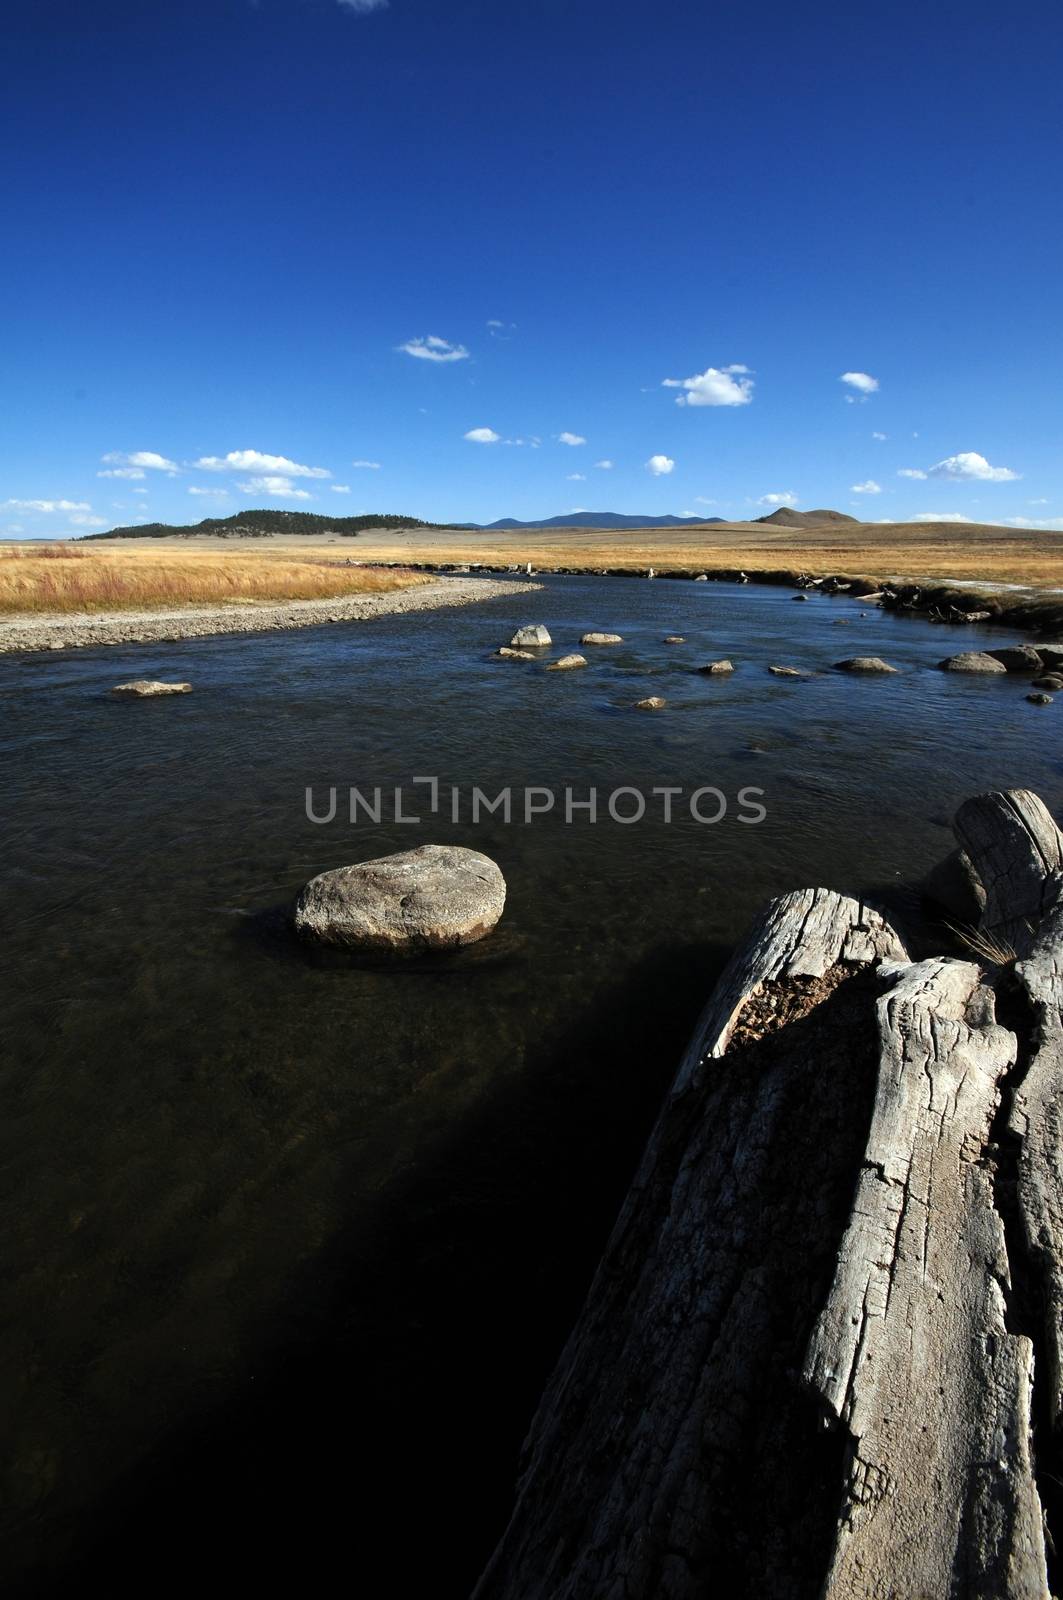 South Platte by welcomia